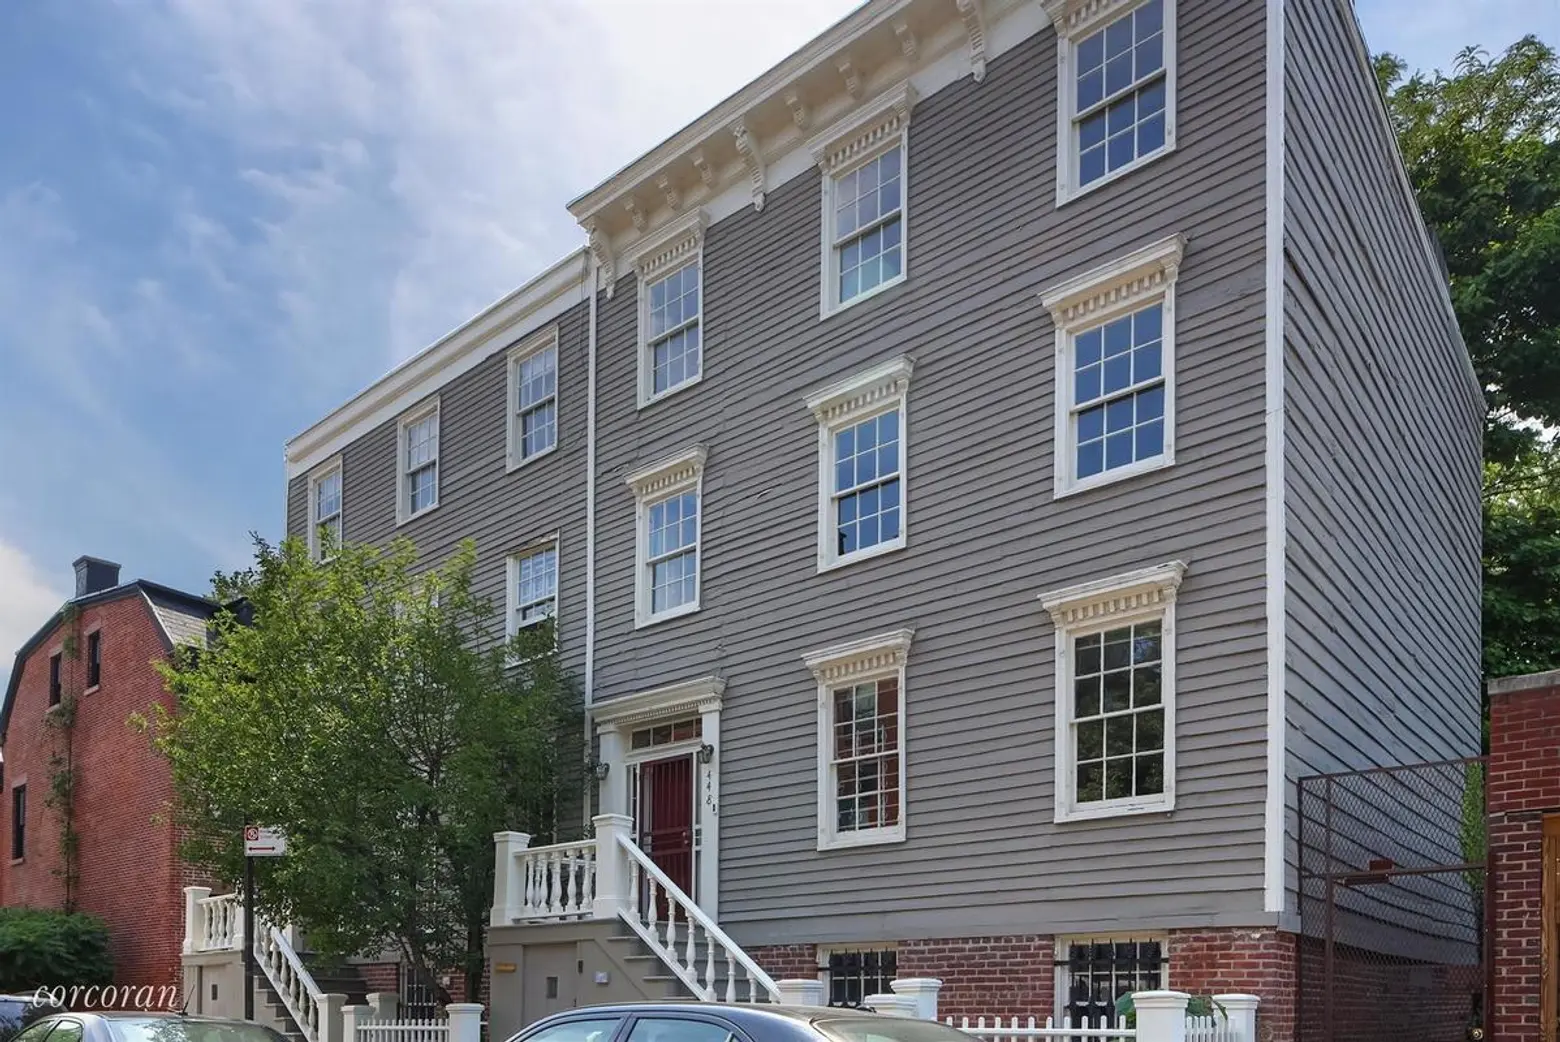 Own a pair of 1840s clapboard houses in Clinton Hill for $4.4M